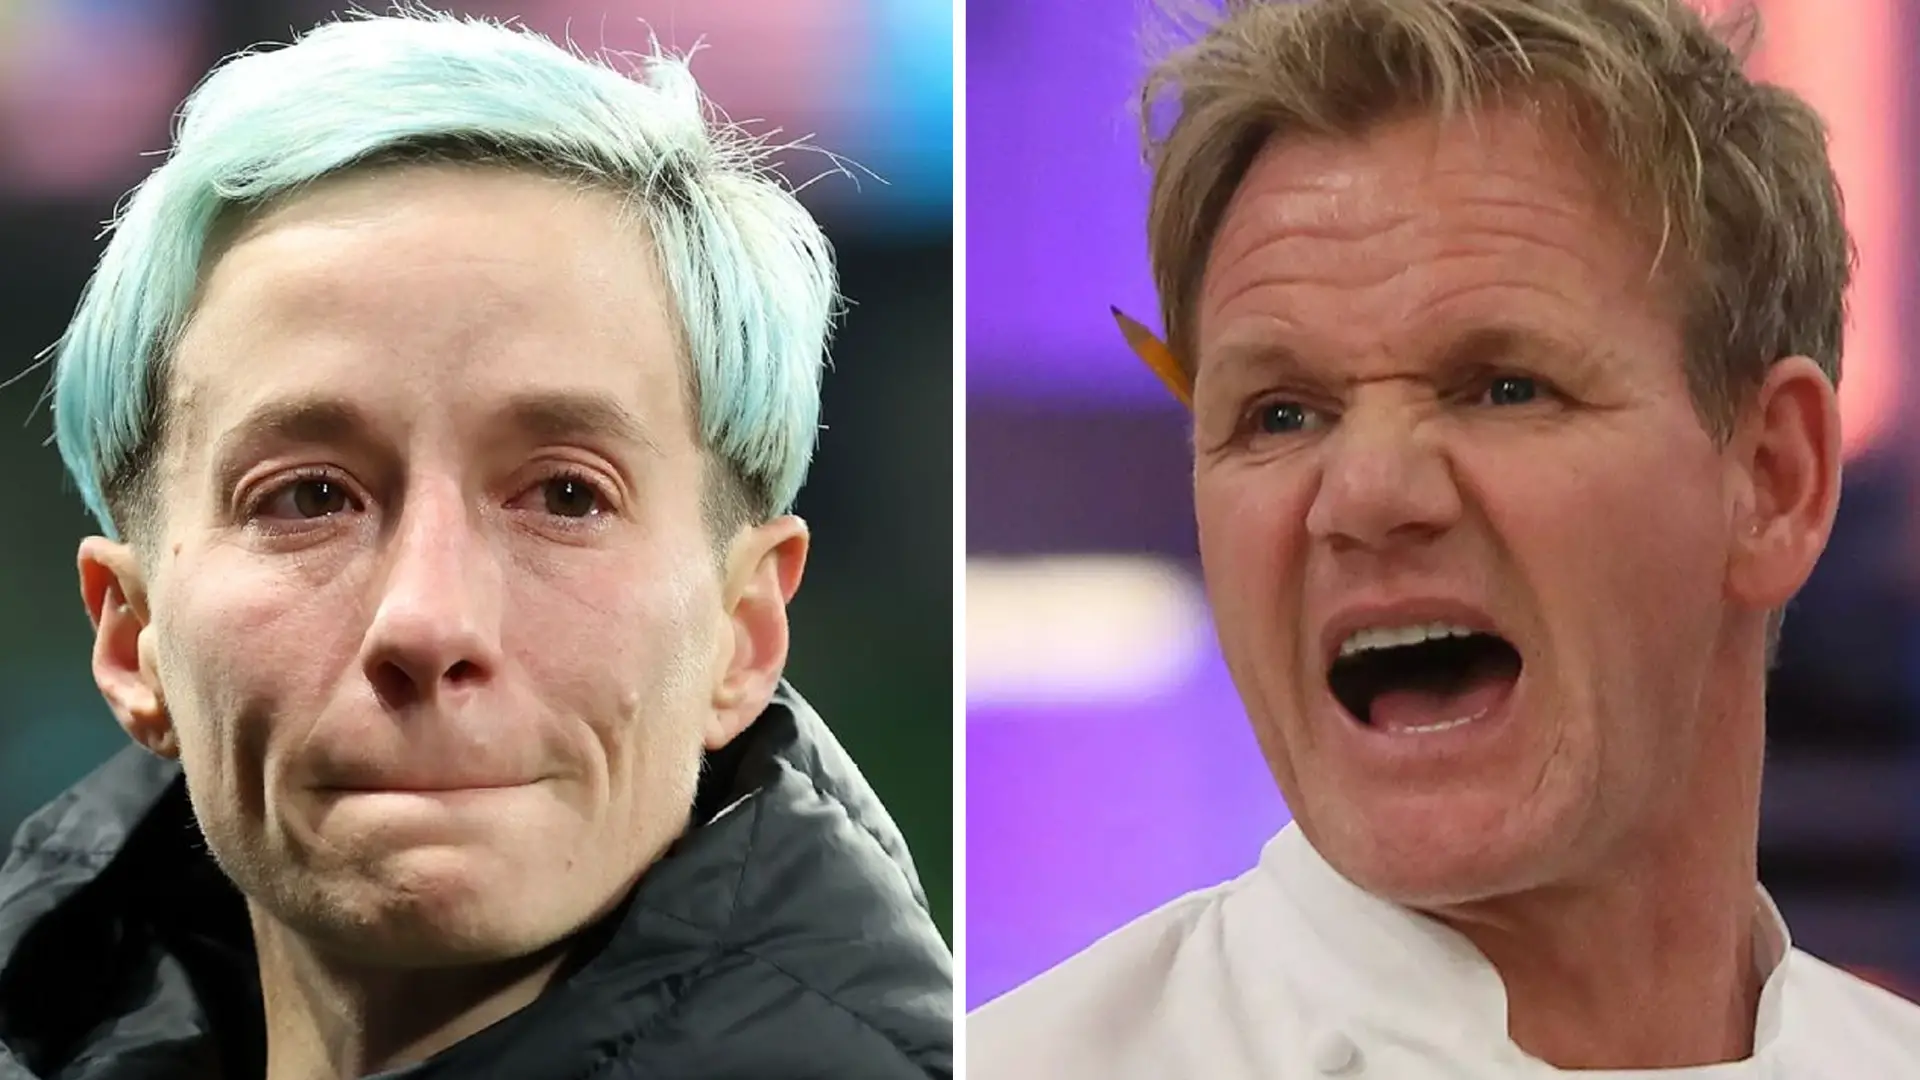 Breaking: Megan Rapinoe Walks Out Crying From Gordon Ramsay's Restaurant After Being Kicked Off